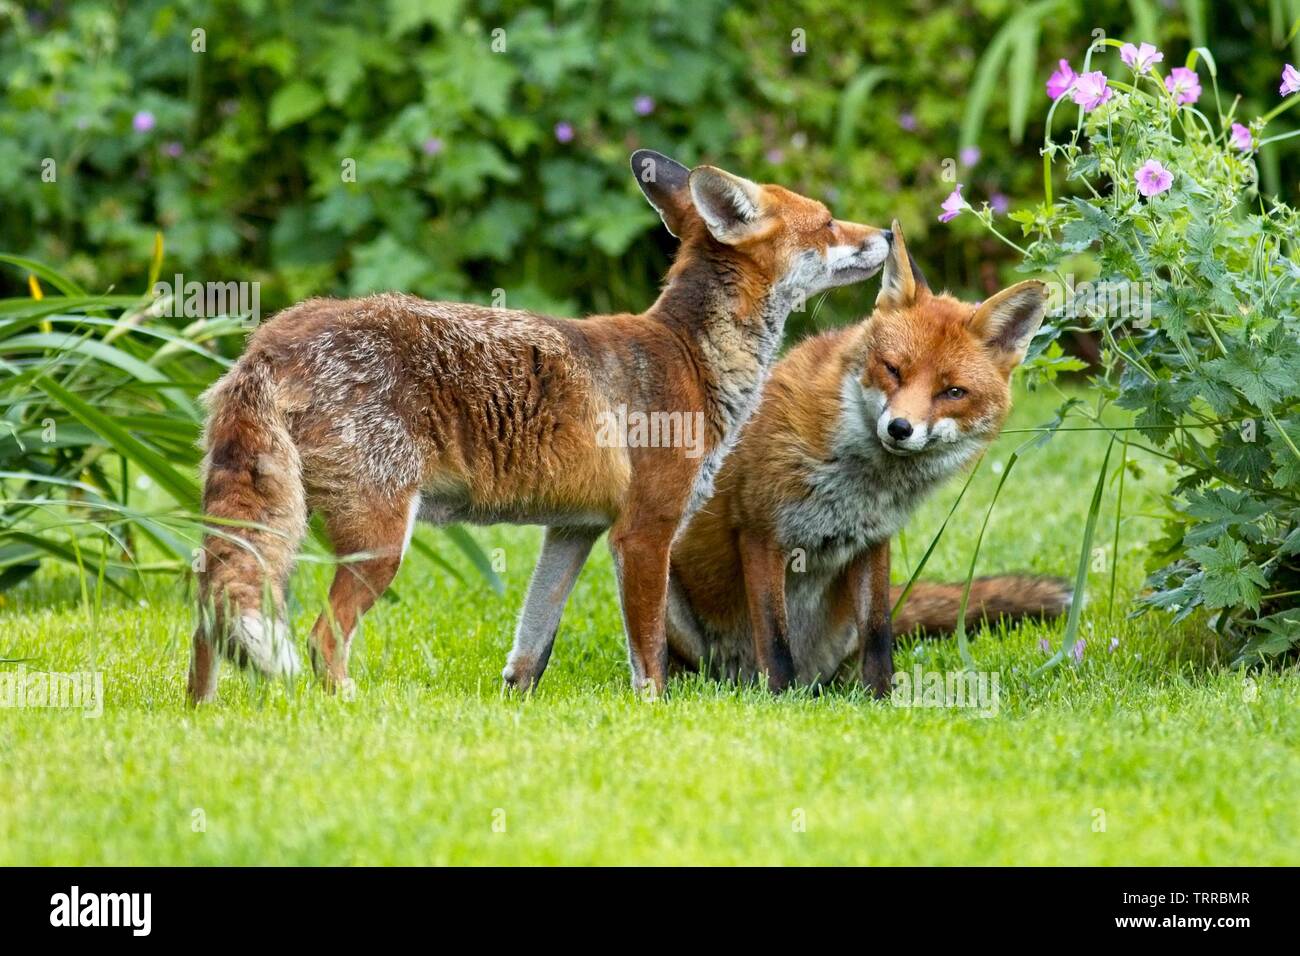 11th Jun 2019. This is the adorable moment a female Red fox (Vulpes vulpes) groomed her mate this evening in East Sussex. The foxes are regular visitors to the garden and often bring their two cubs with them.East Sussex,UK.Credit: Ed Brown/Alamy Live News Stock Photo